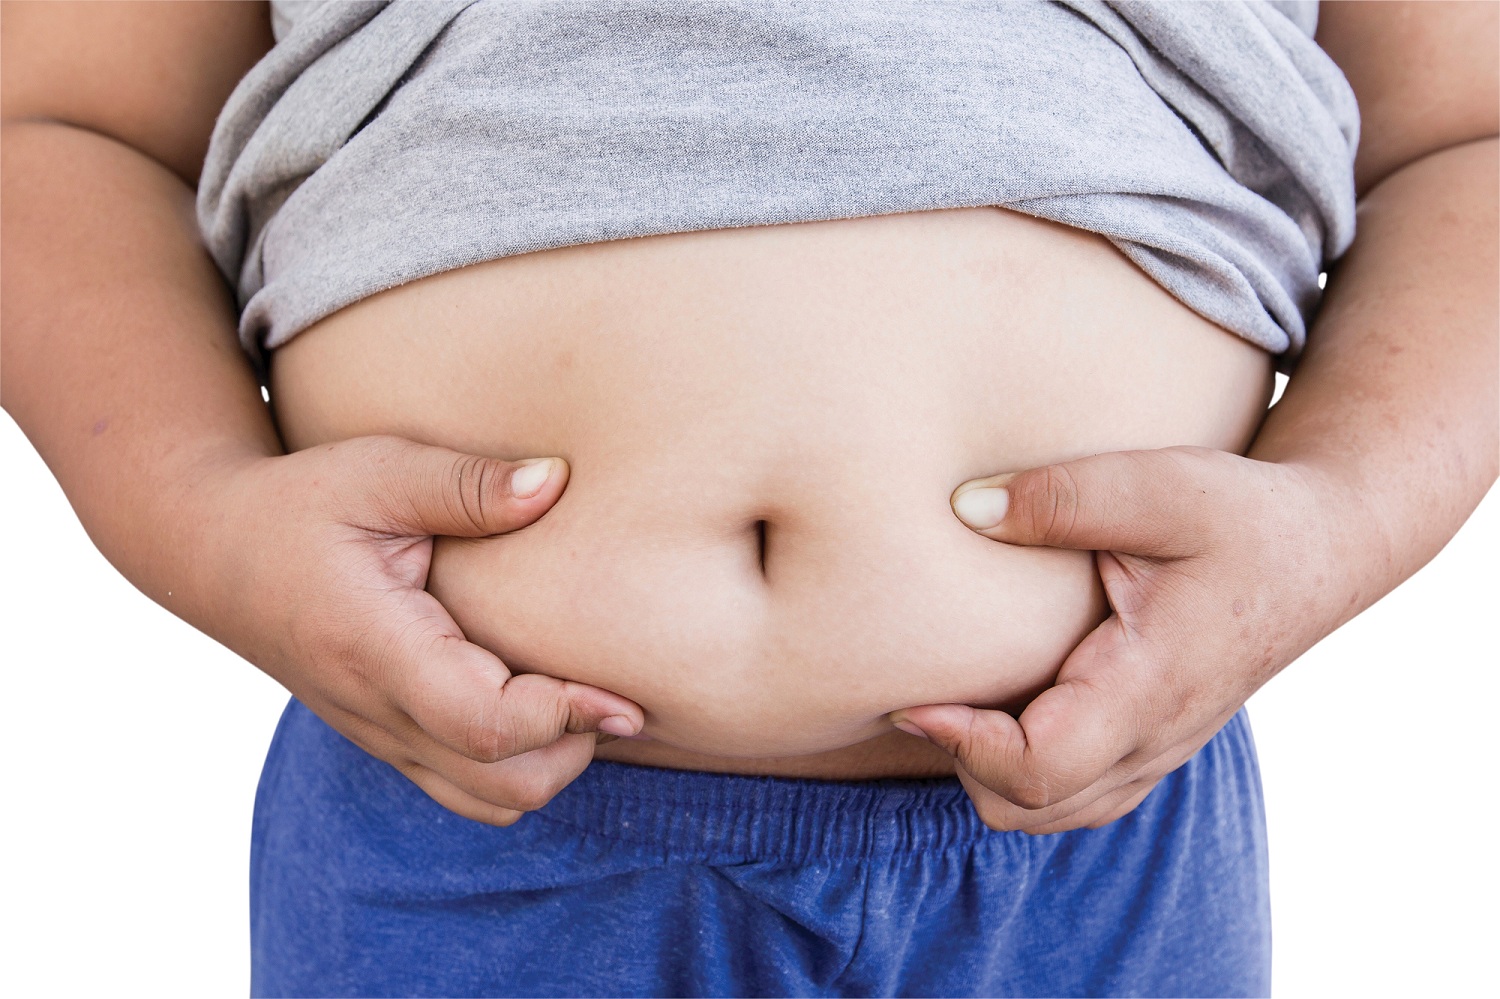 Many factors are responsible for causing obesity